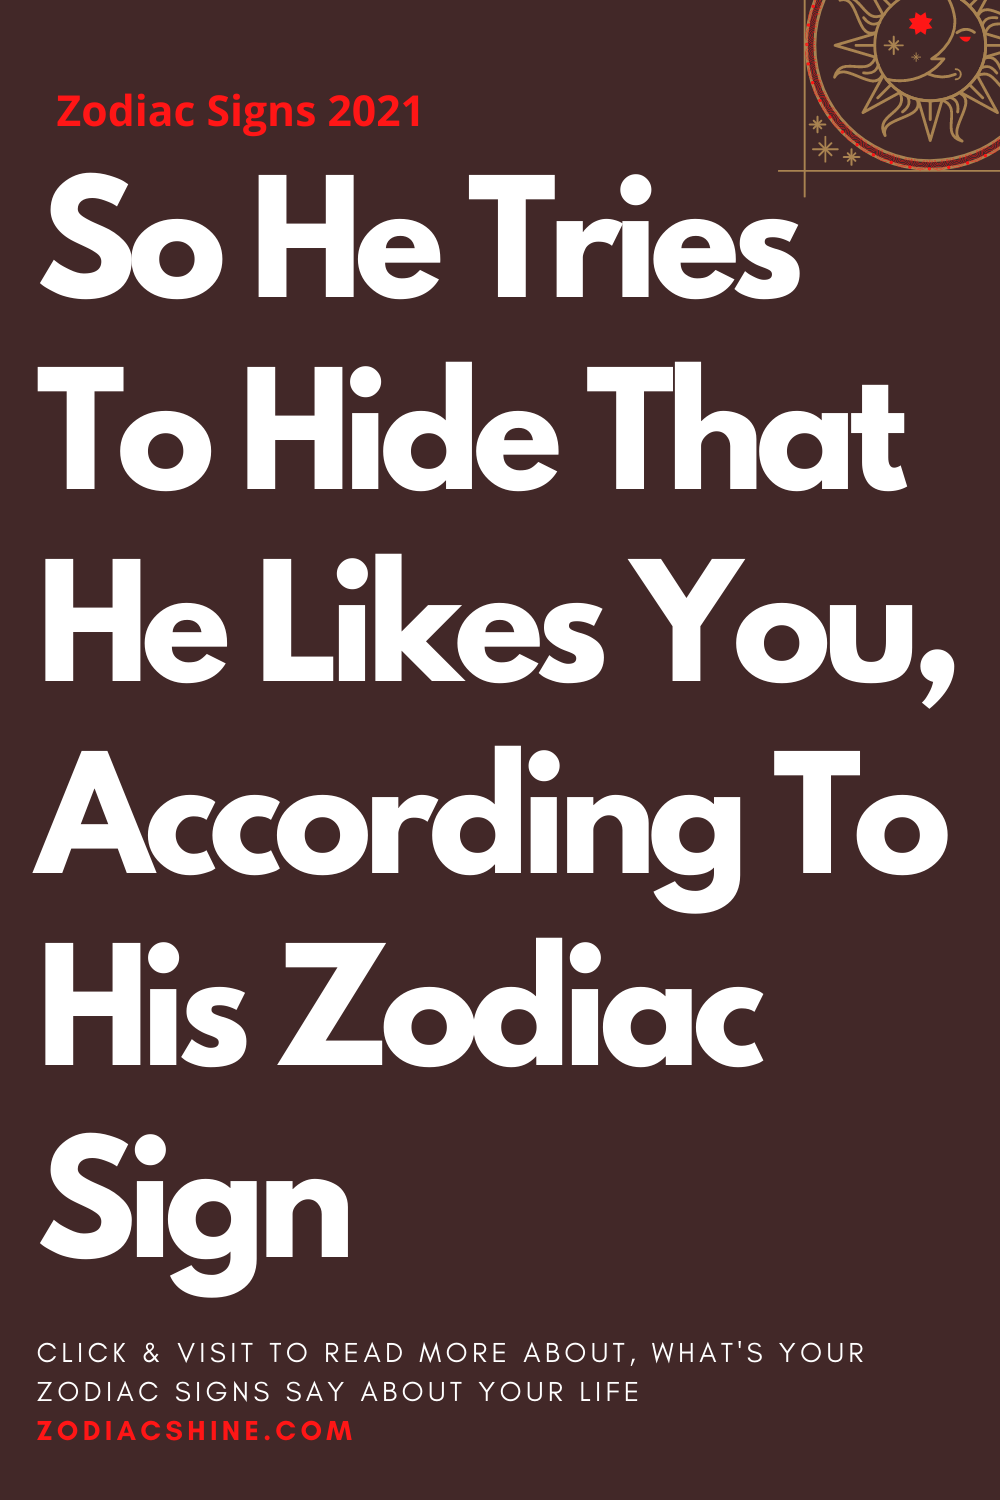 So He Tries To Hide That He Likes You According To His Zodiac Sign